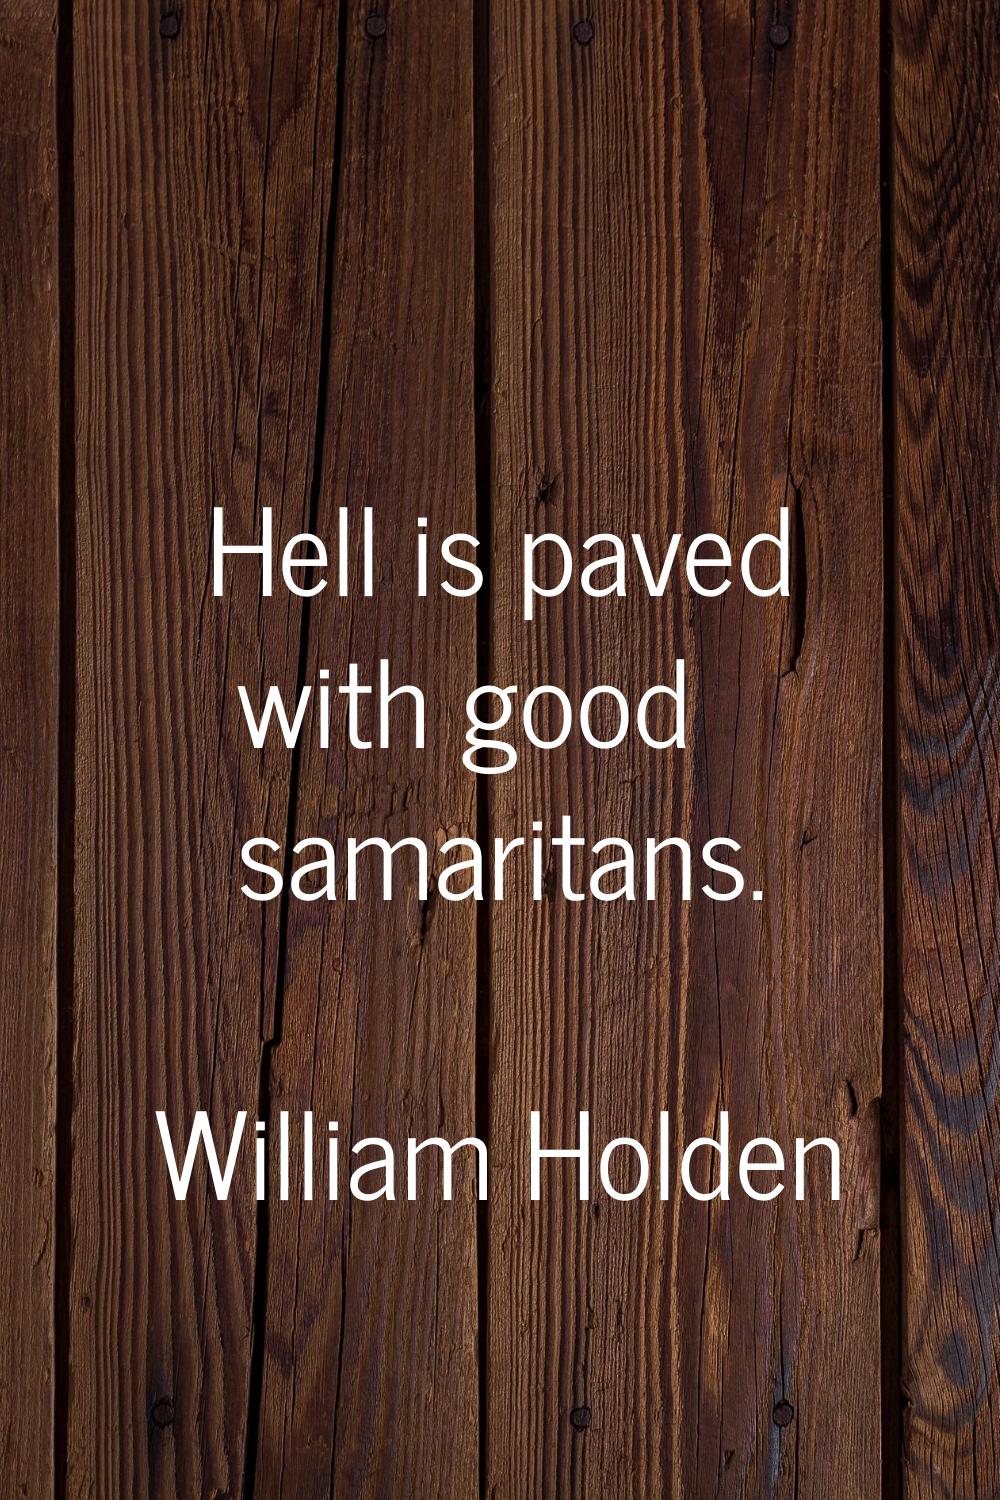 Hell is paved with good samaritans.